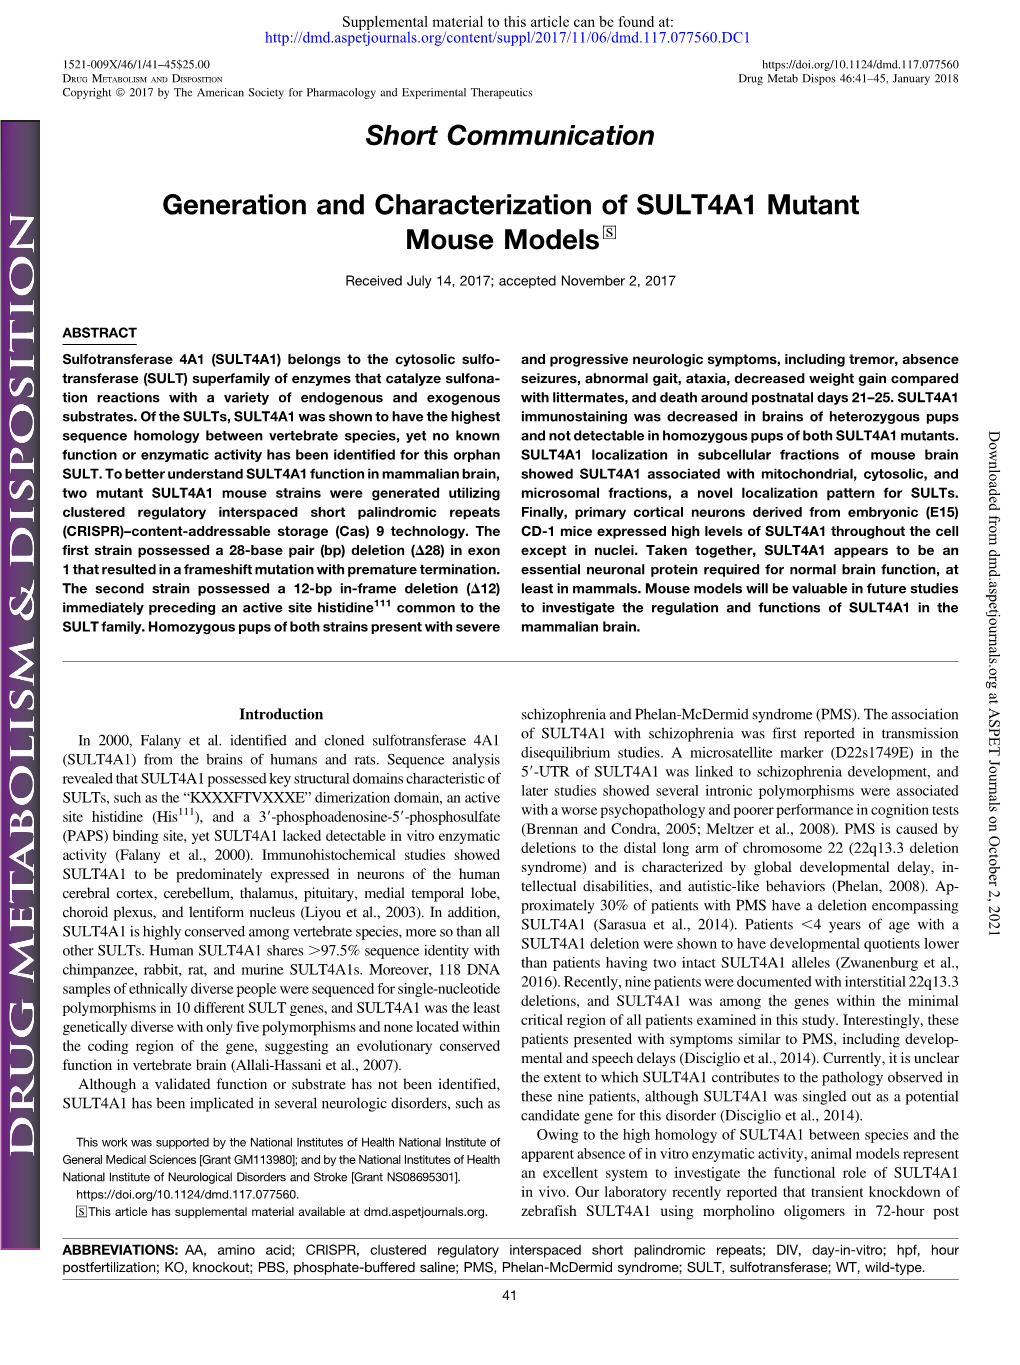 Generation and Characterization of SULT4A1 Mutant Mouse Models S